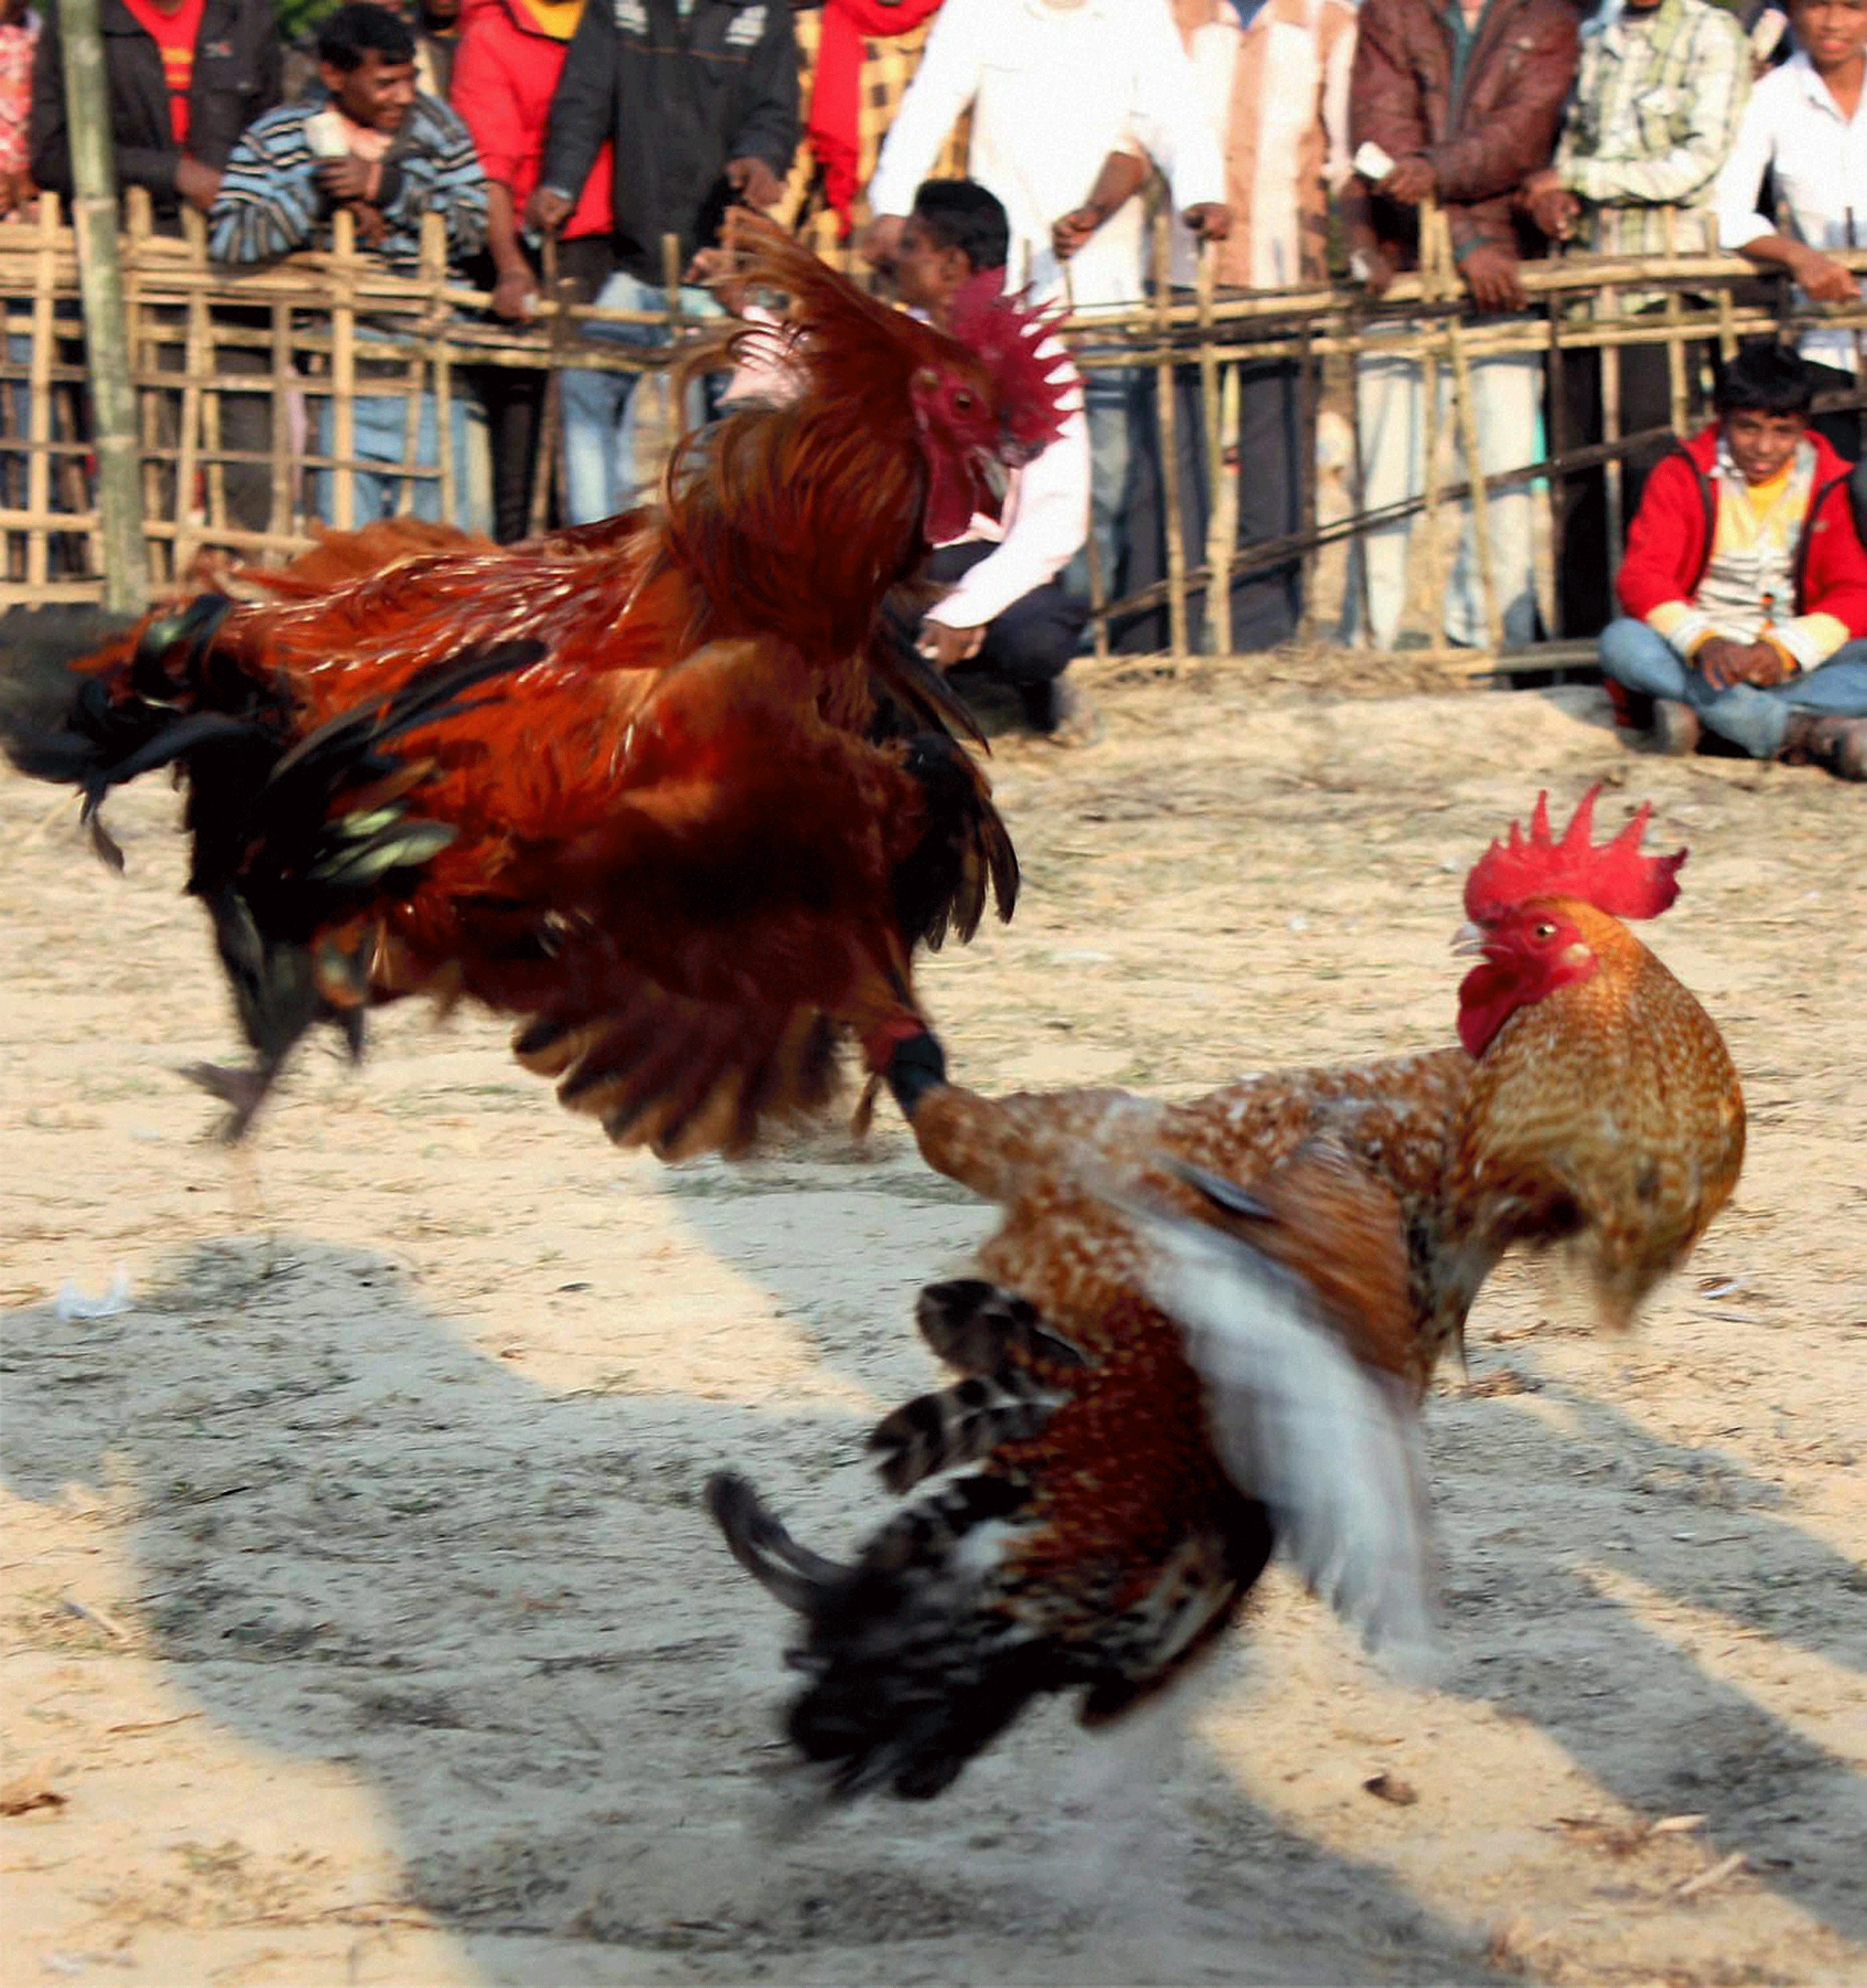 The Supreme Court on Monday upheld the ban order on cock fight imposed by the High Court of Judicature at Hyderabad in December. PTI file photo